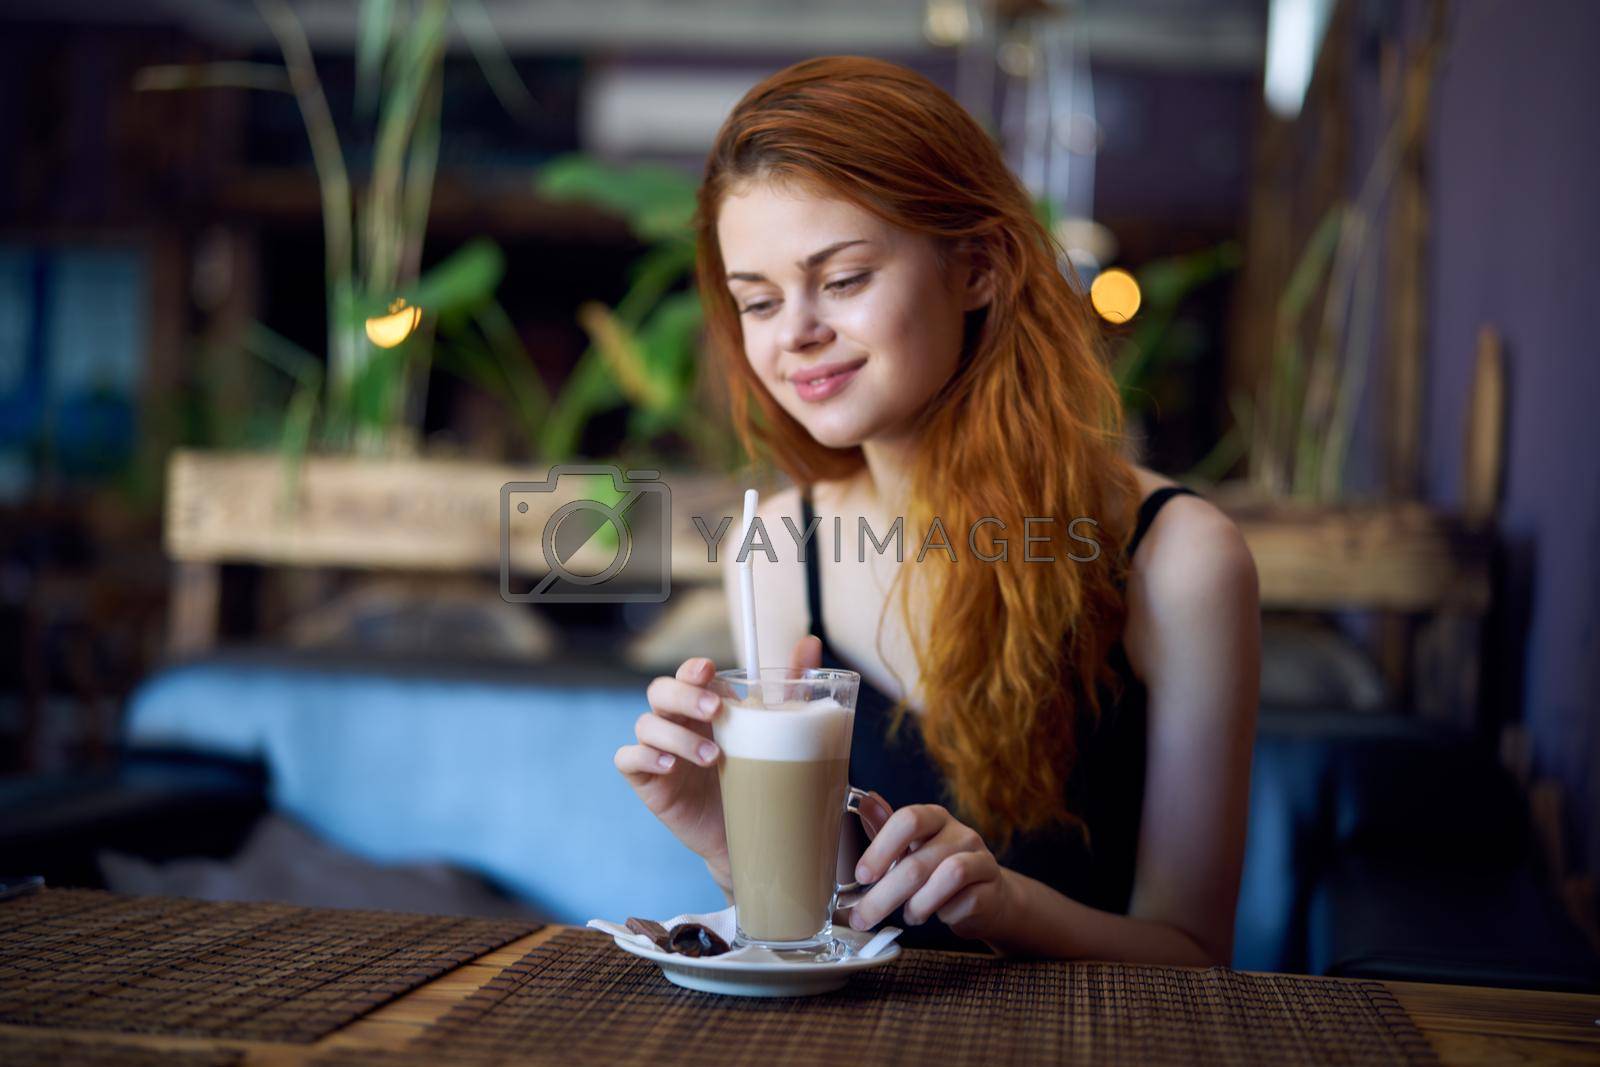 Royalty free image of pretty woman in cafe drink communication relaxation by Vichizh